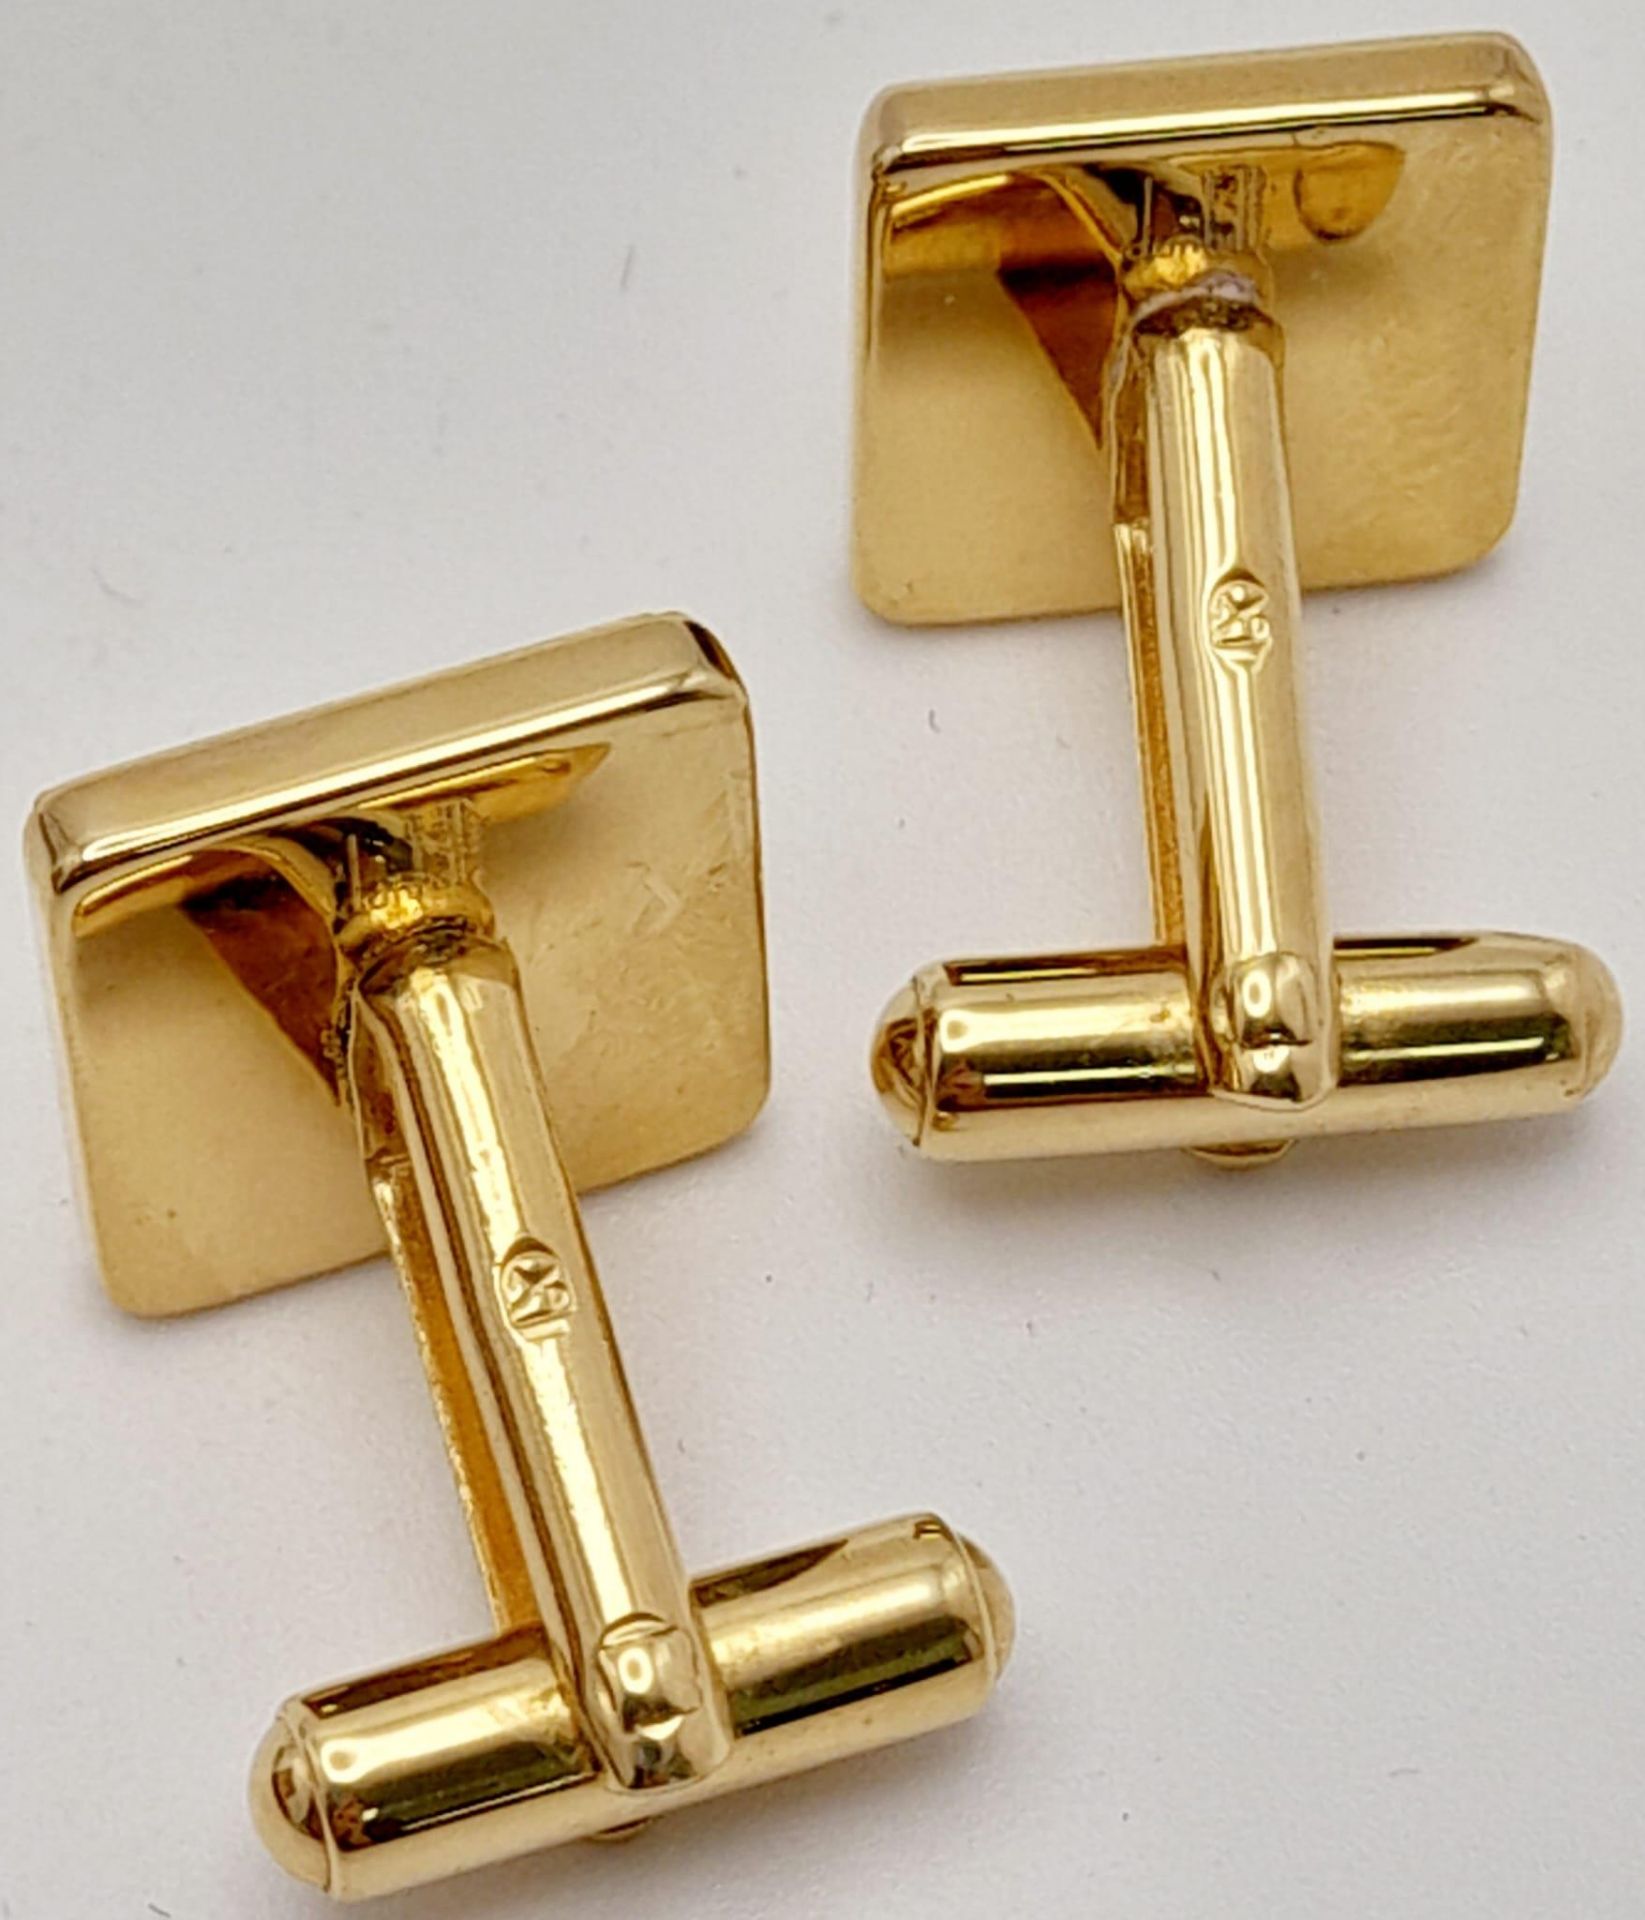 An Excellent Condition Pair of Square Yellow Gold Gilt Tortoiseshell Cufflinks by Dunhill in their - Image 3 of 8